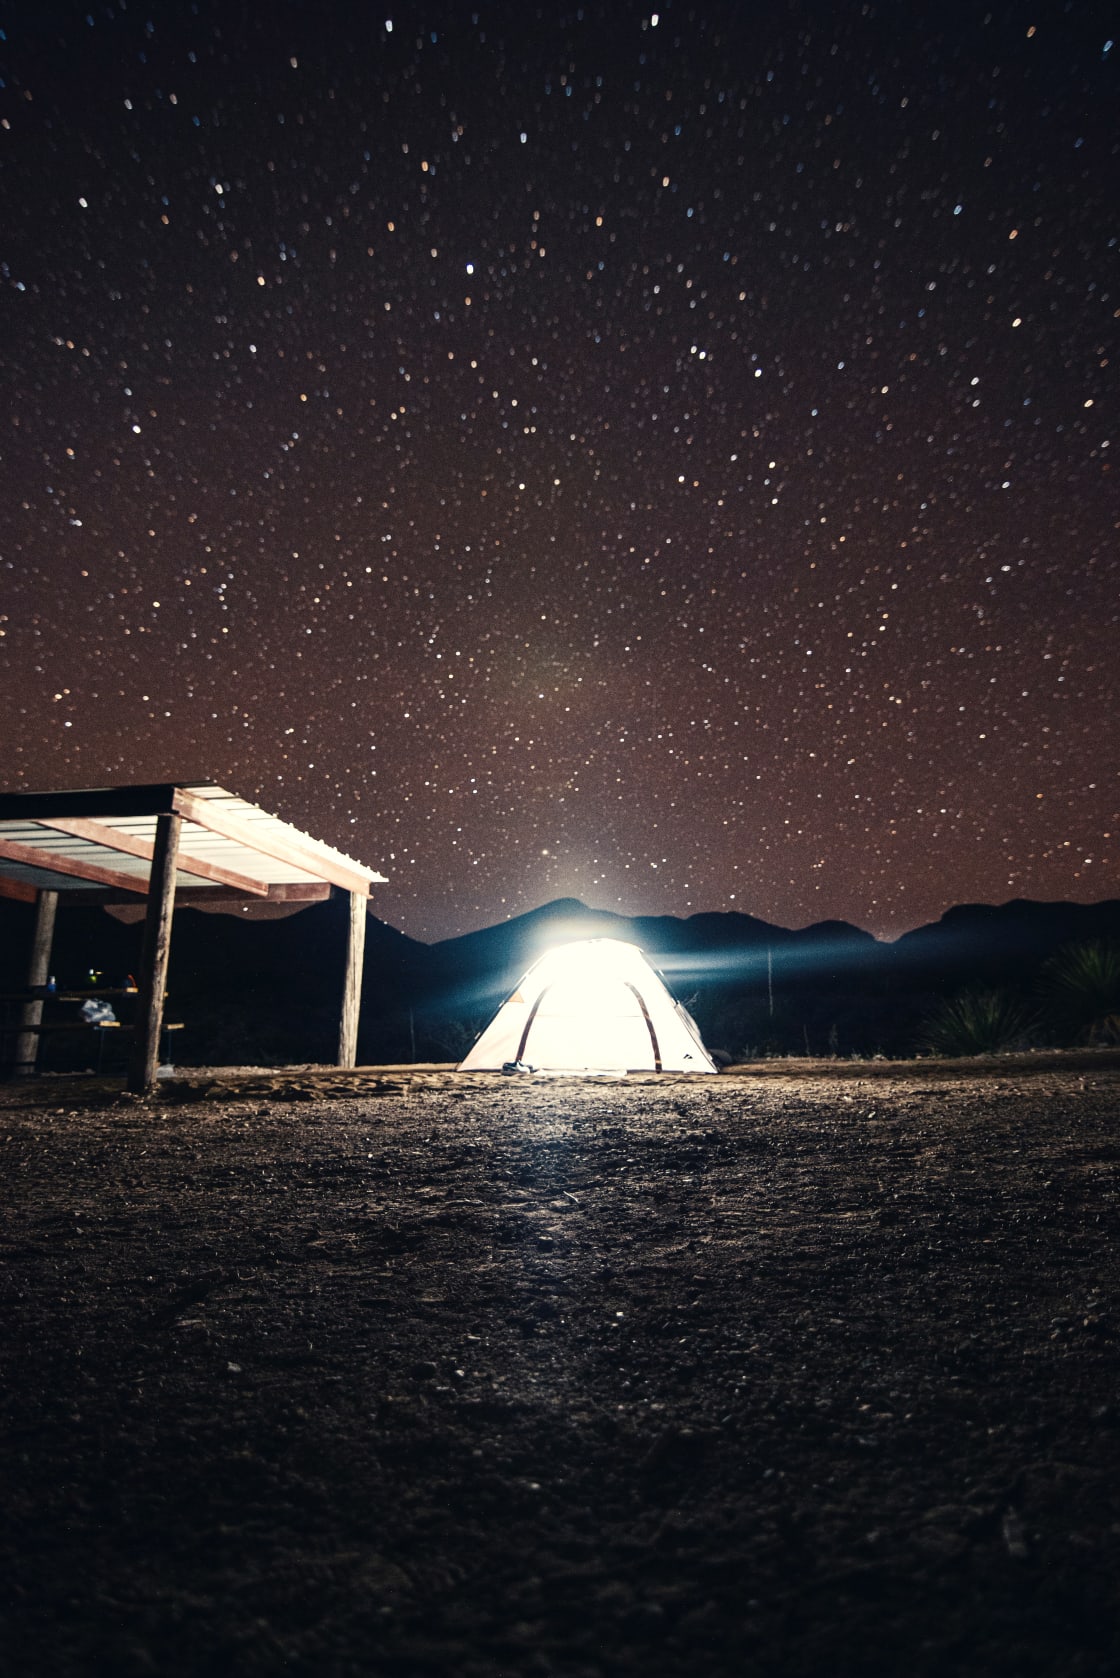 HipCamper Jaziel T. shared these awesome night shots he captured during his experience at Perdido #1! 